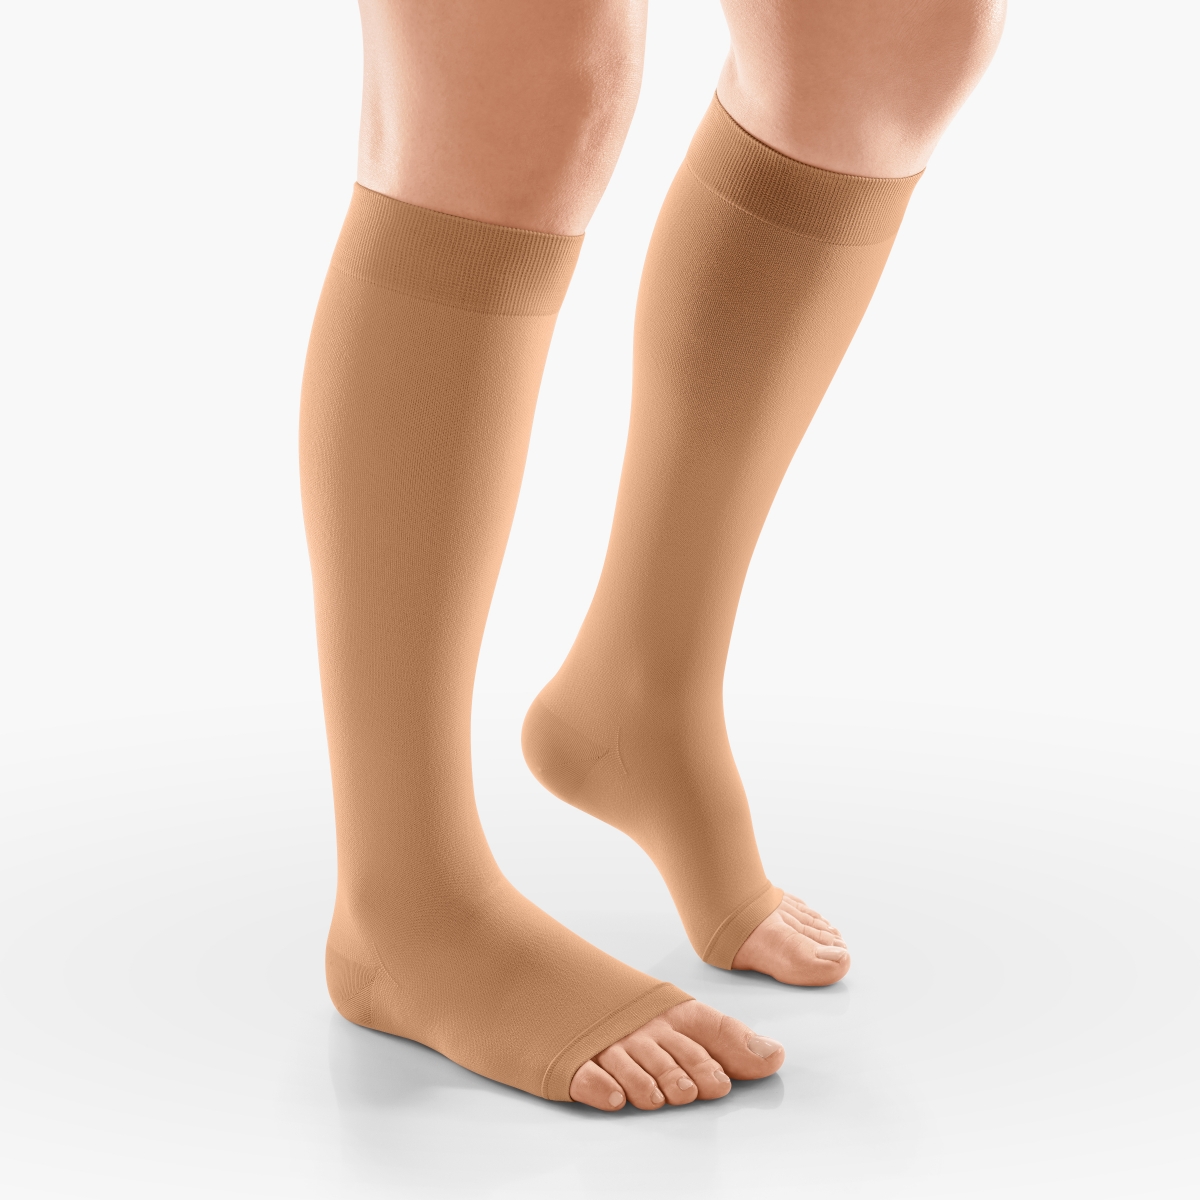 Advance Cotton Varicose Vein Support Stocking, For Used After